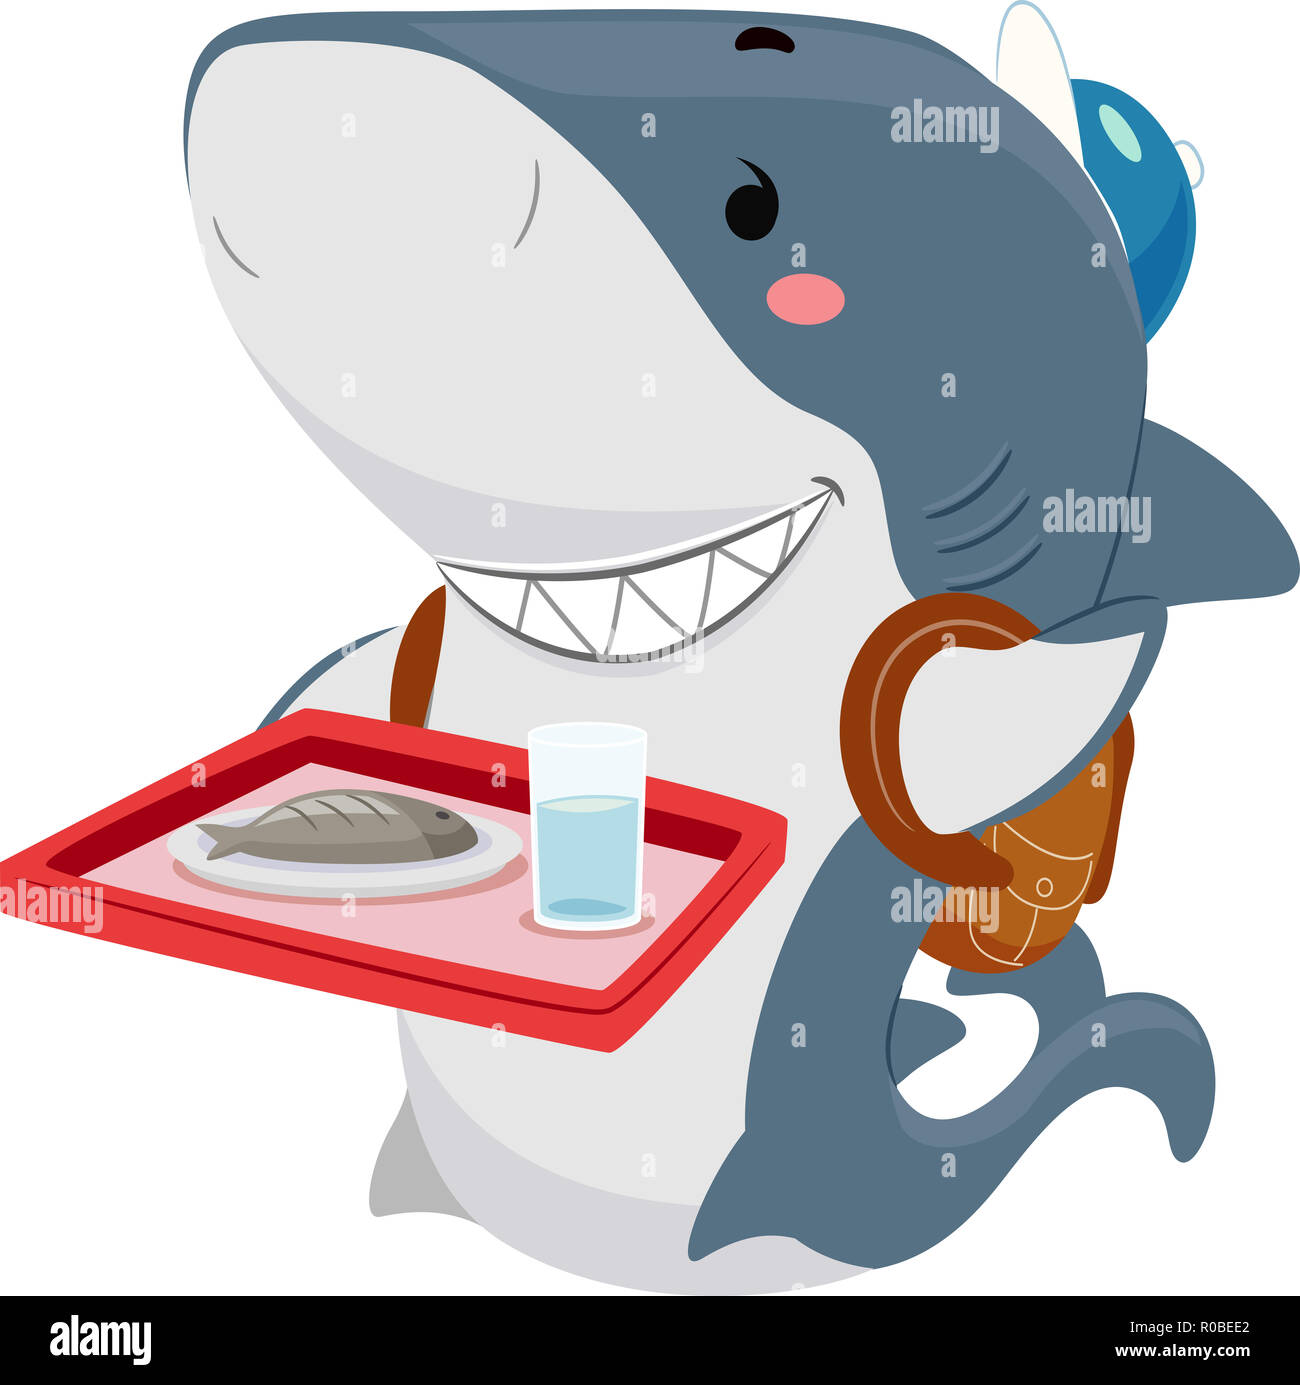 Illustration of a Shark Student Mascot Wearing a Backpack and